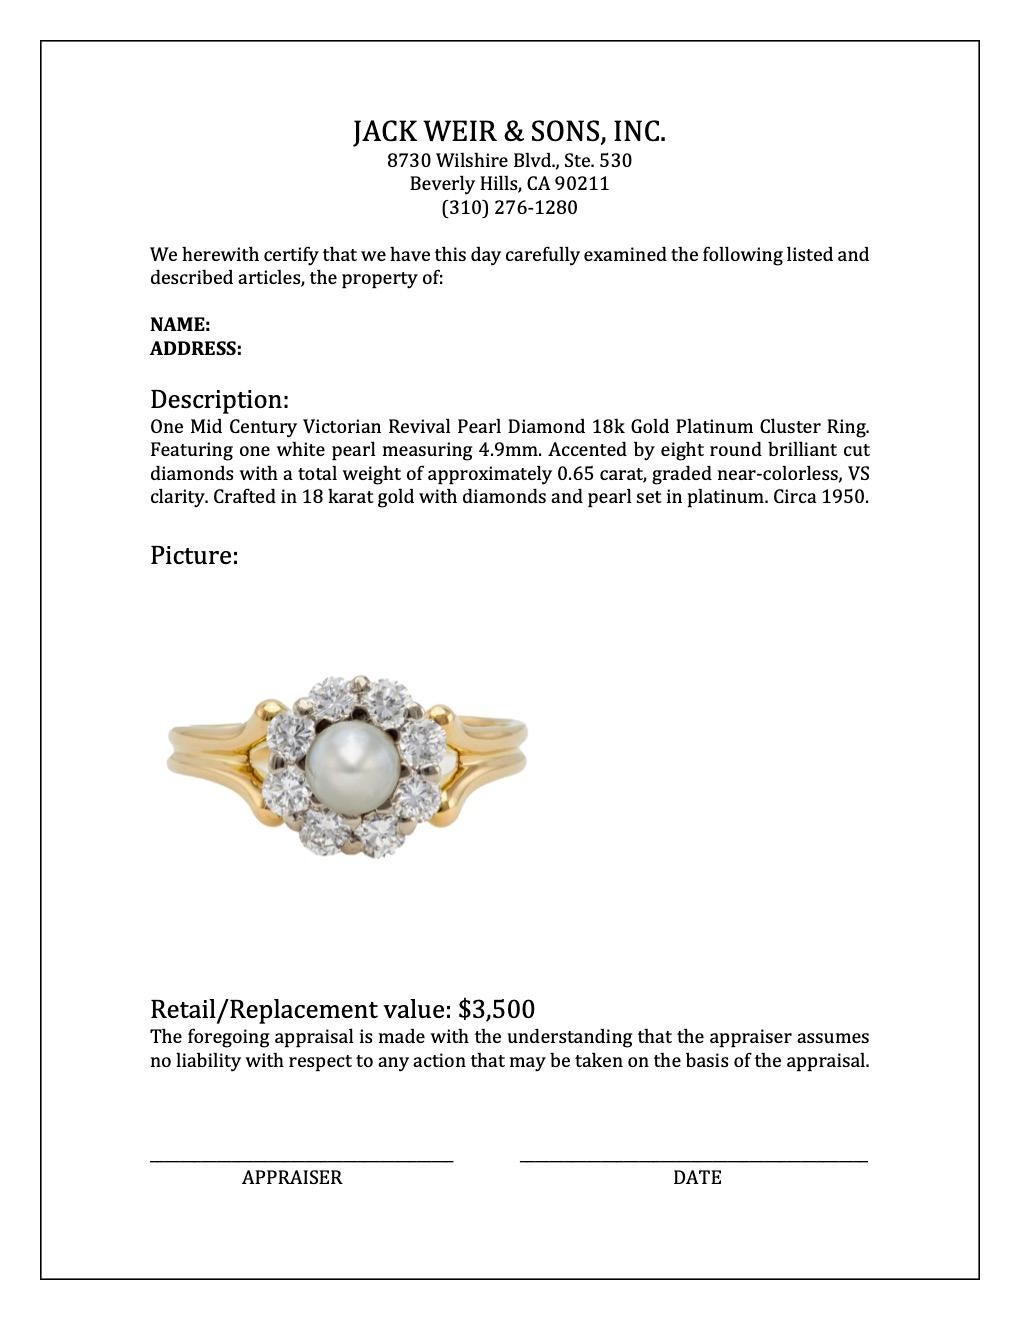 Mid Century Victorian Revival Pearl Diamond 18k Gold Platinum Cluster Ring For Sale 1